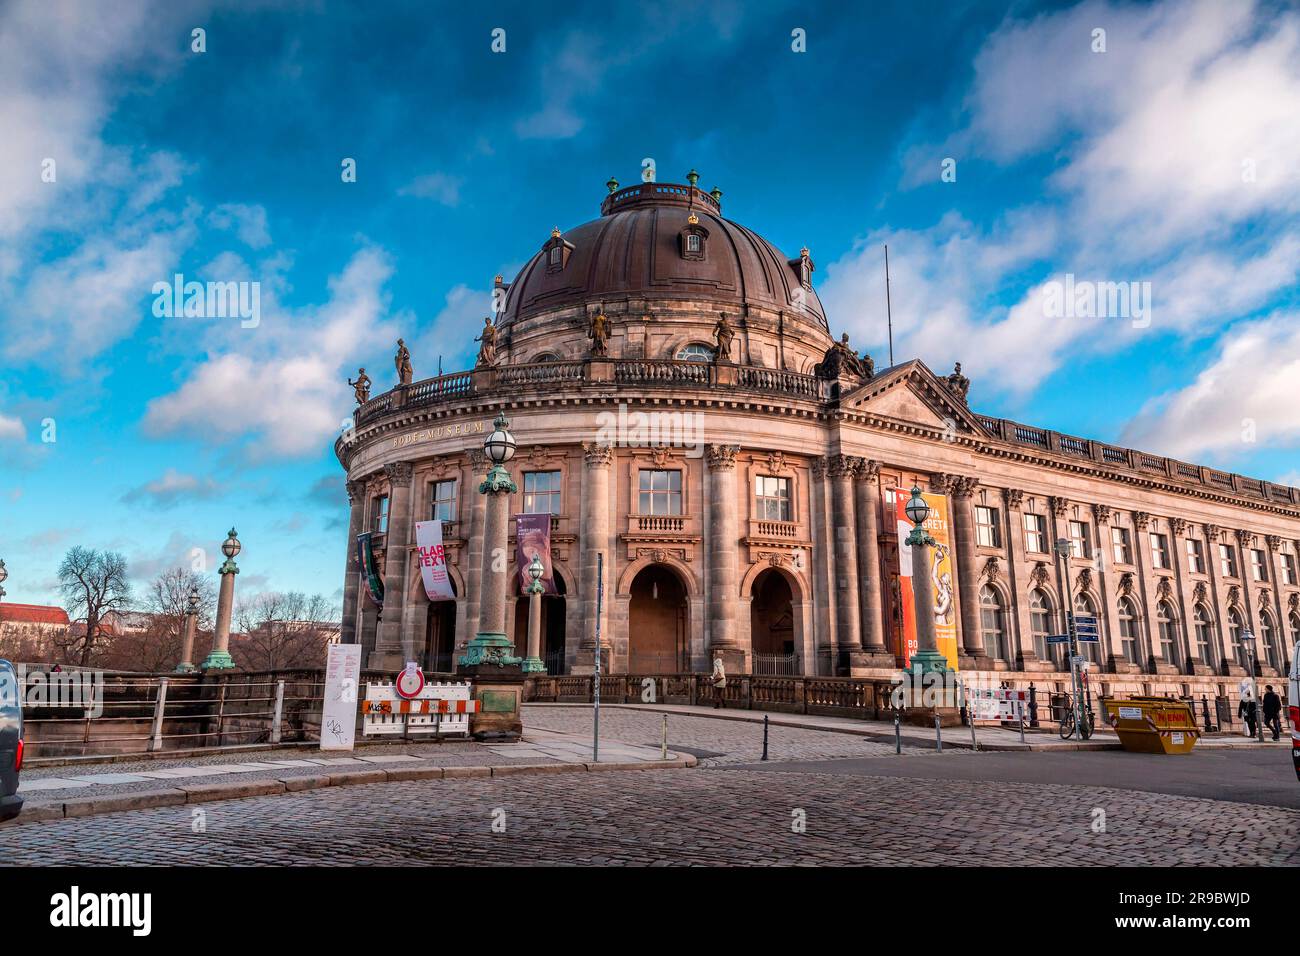 Berlin, Germany - December 20, 2021: Exterior view of Bode Museum on the Museum Island, along the river Spree in Berlin, the German capital. Stock Photo